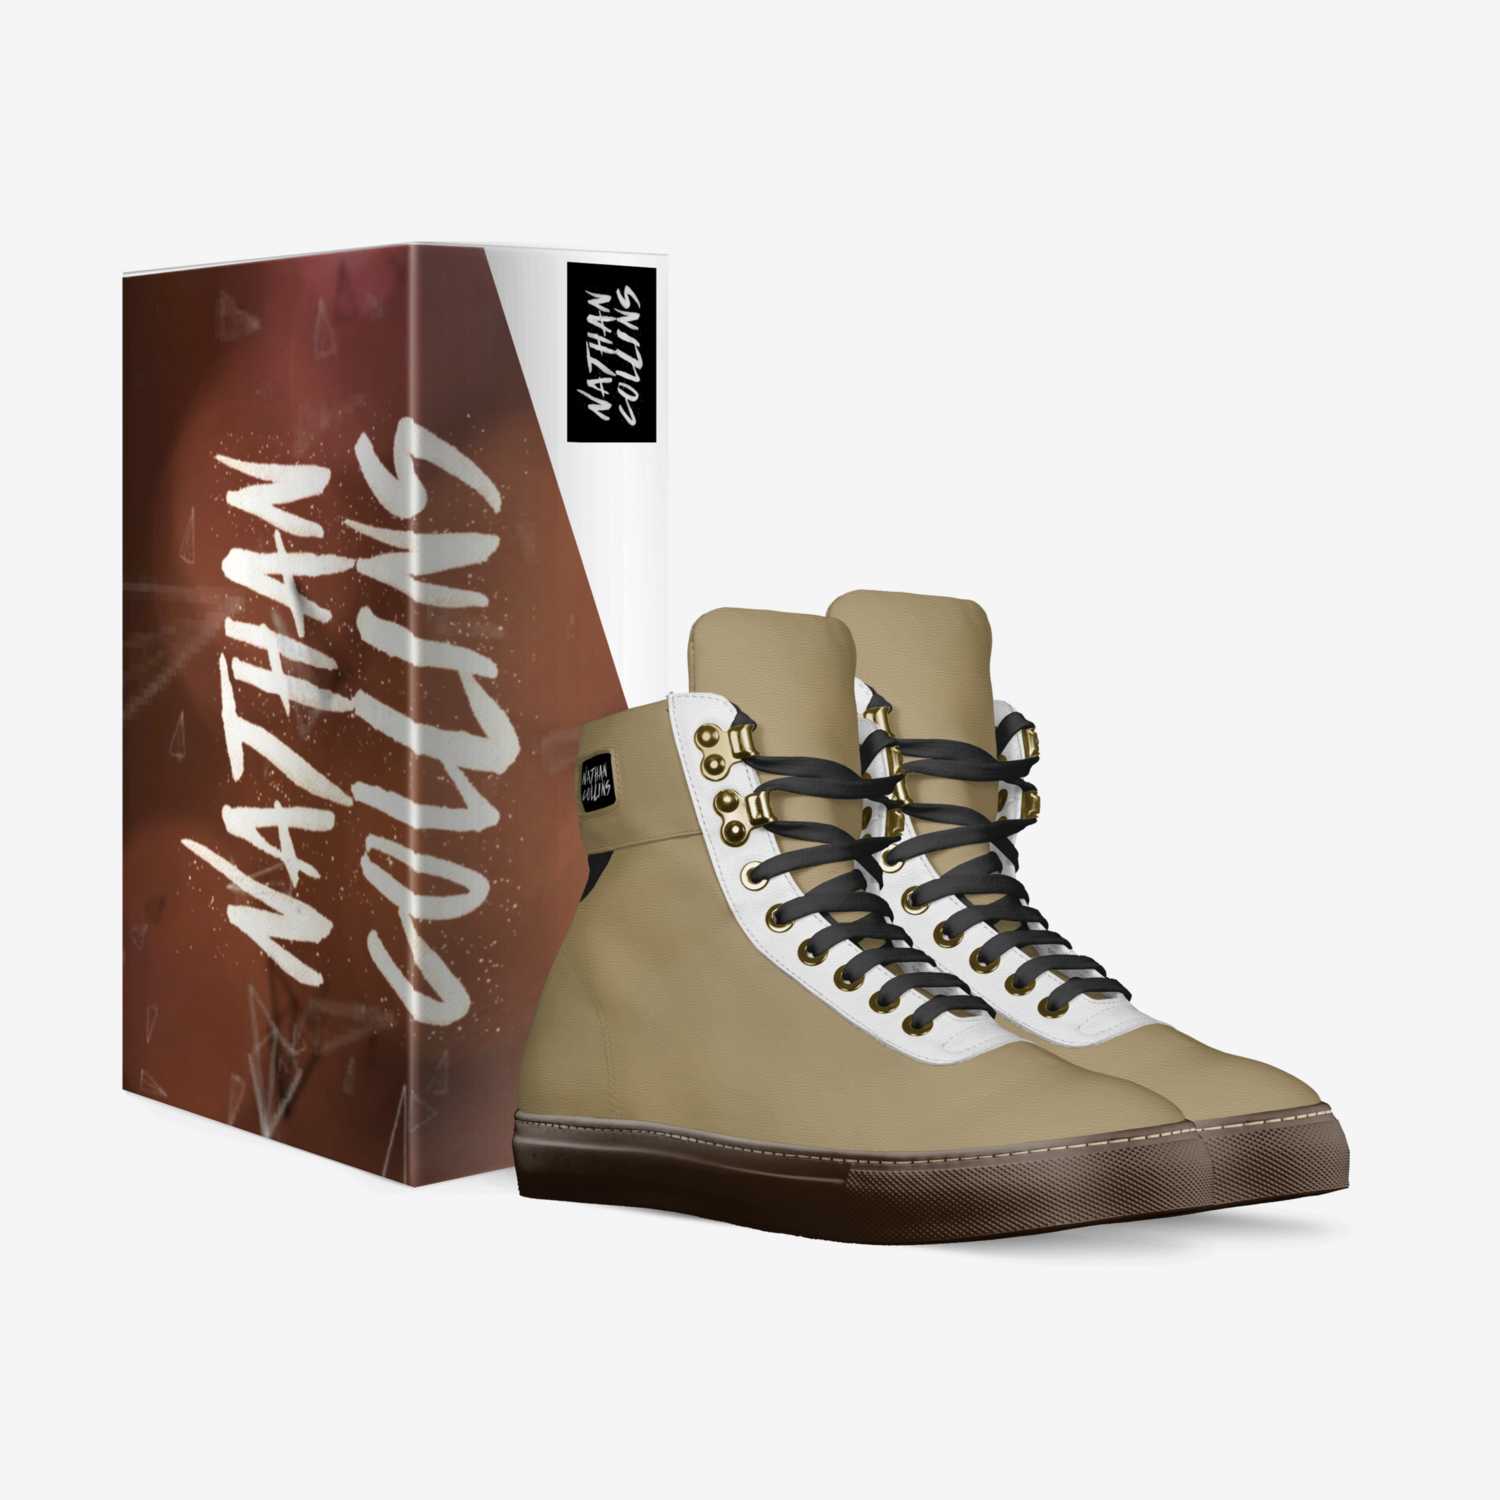 NTC 97'S custom made in Italy shoes by Nathan Collins | Box view